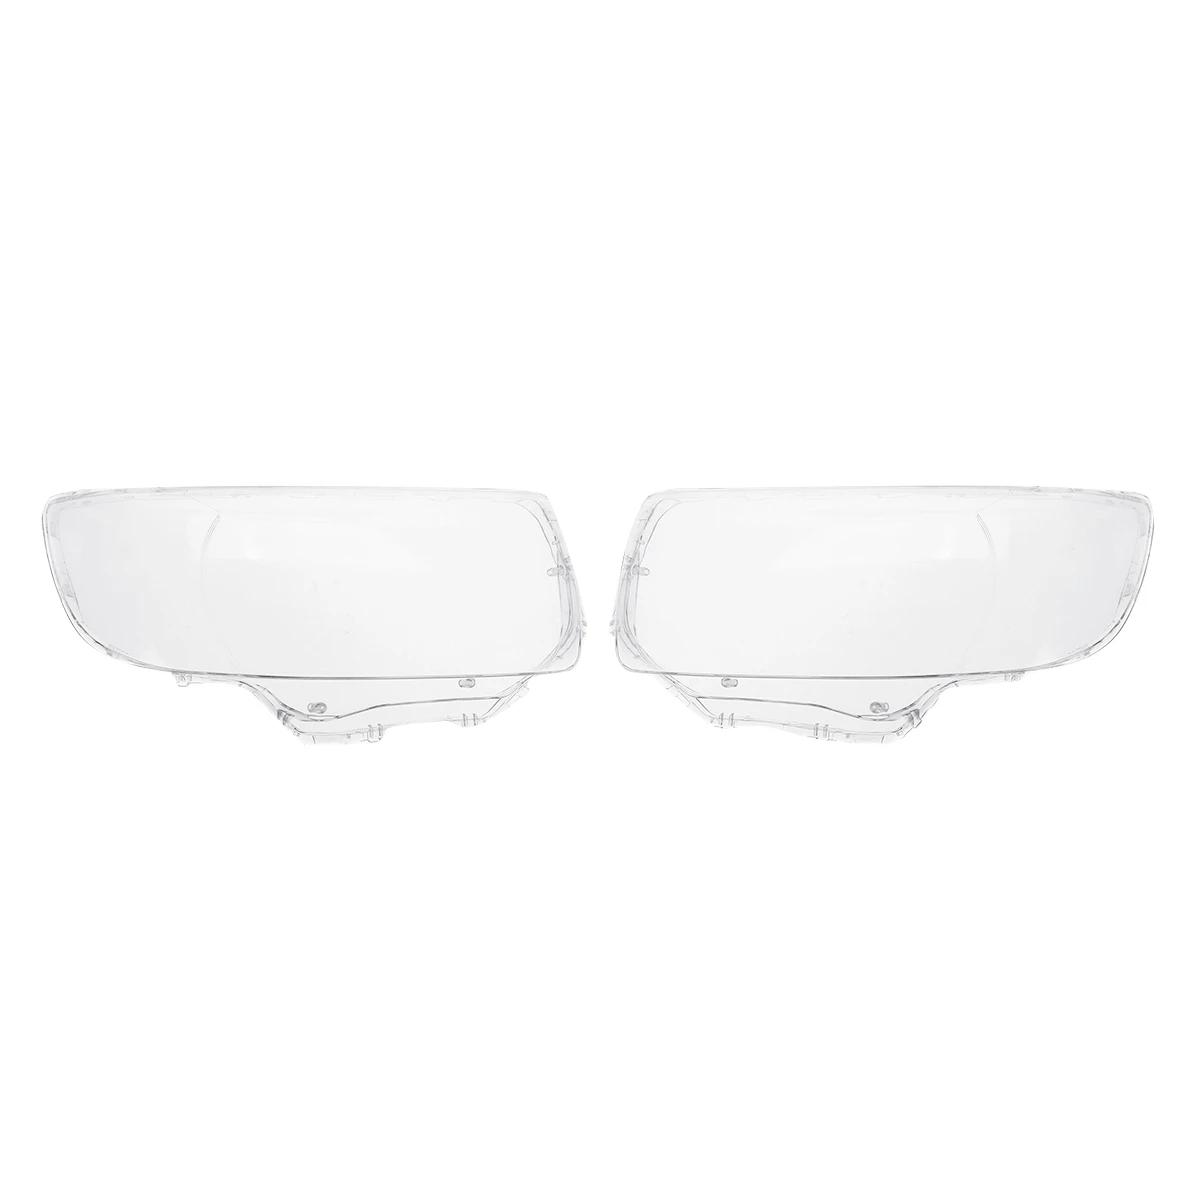 

1Pair Car Front Head Light Lamp Lens Cover Head Light Shell Lamp Hoods for Subaru Forester 2006-2008 SU2503119 SU2502119